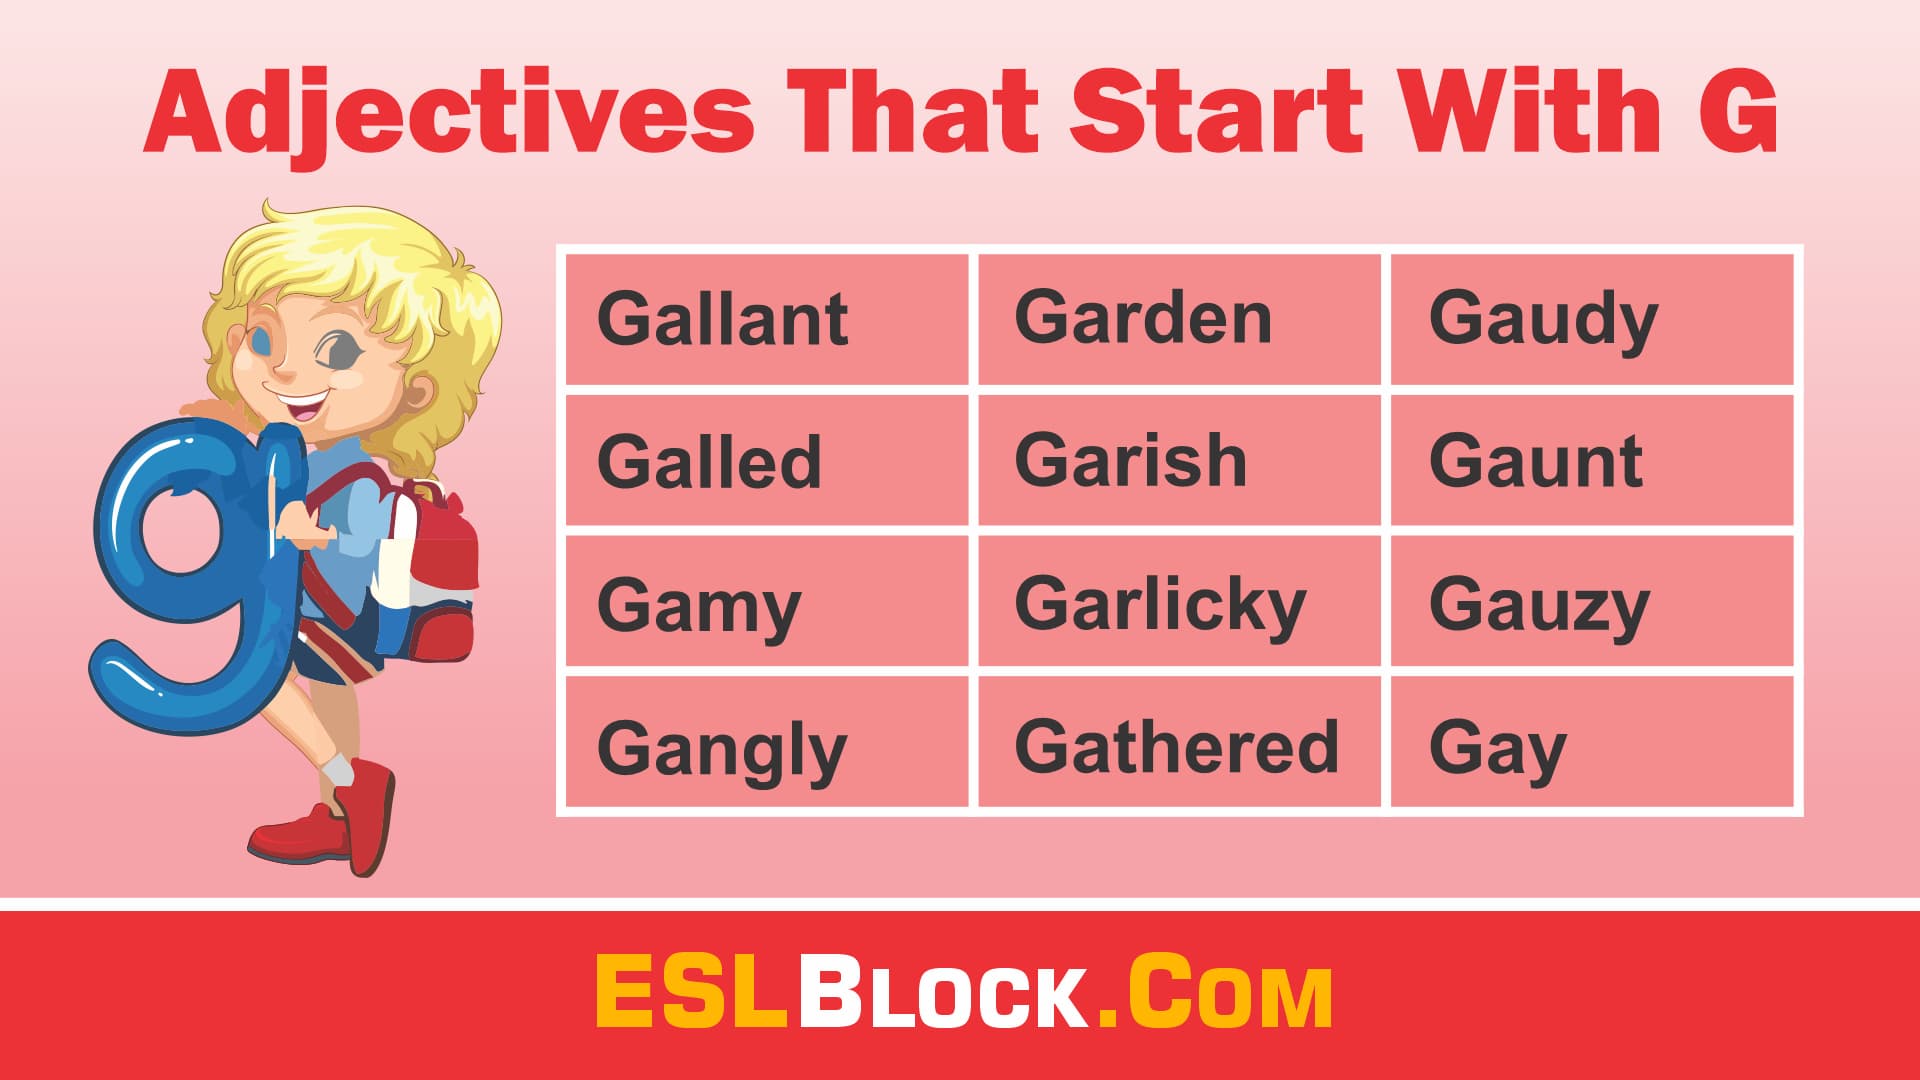 Adjectives that start with G, A-Z Adjectives, Adjective Words, Adjectives, G Words, Vocabulary, Words That Describe a Person